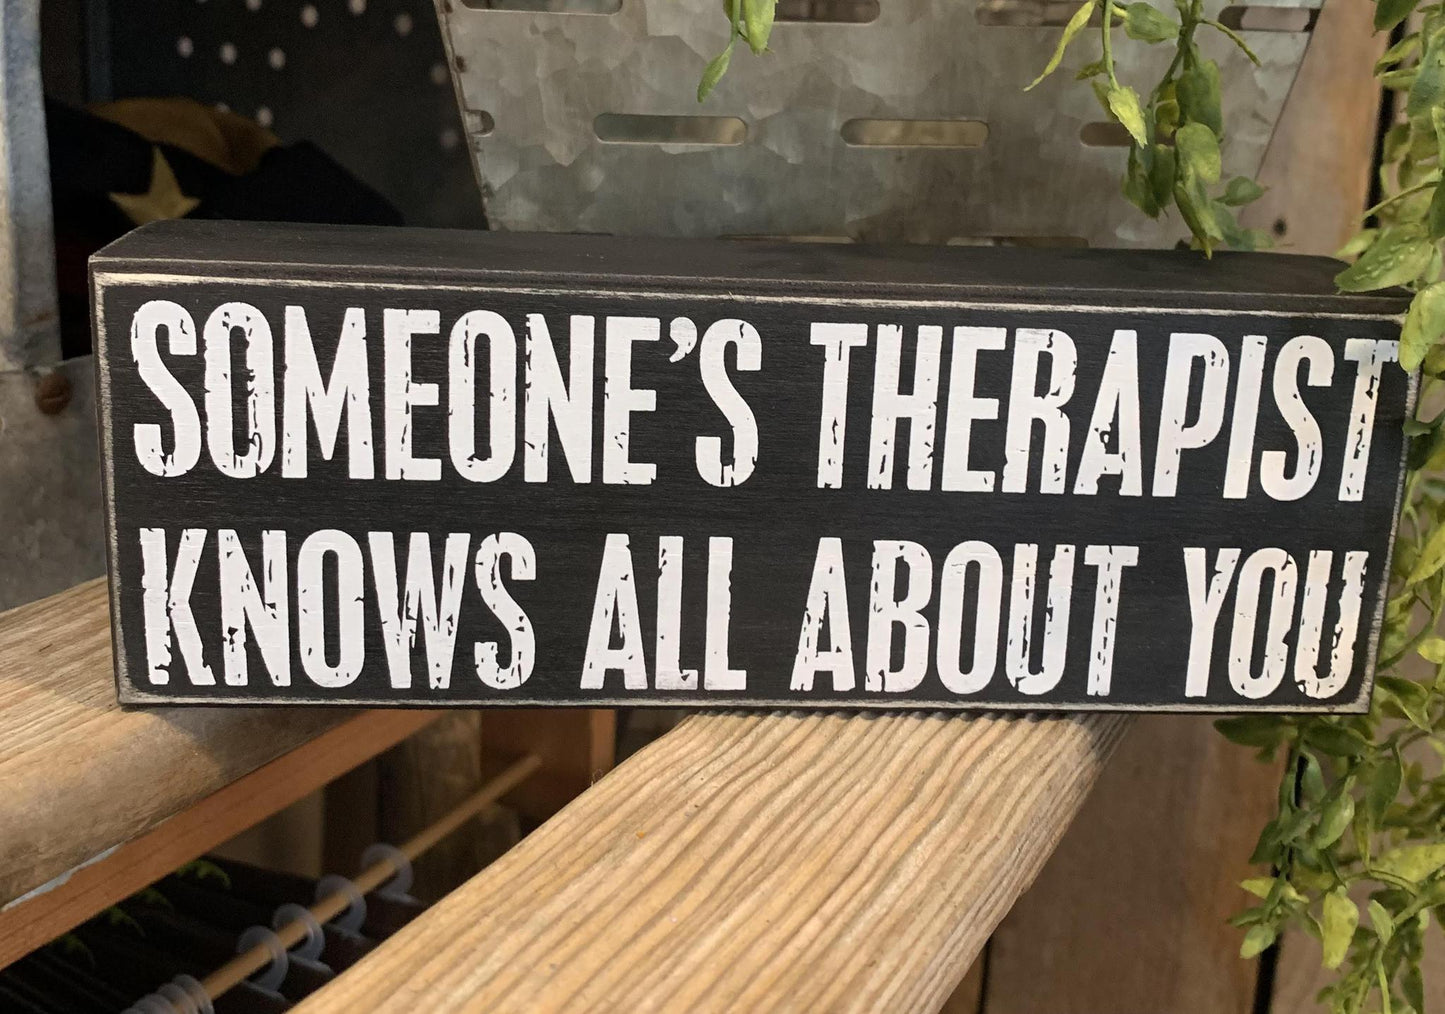 Someone's Therapist Knows All About You Sign